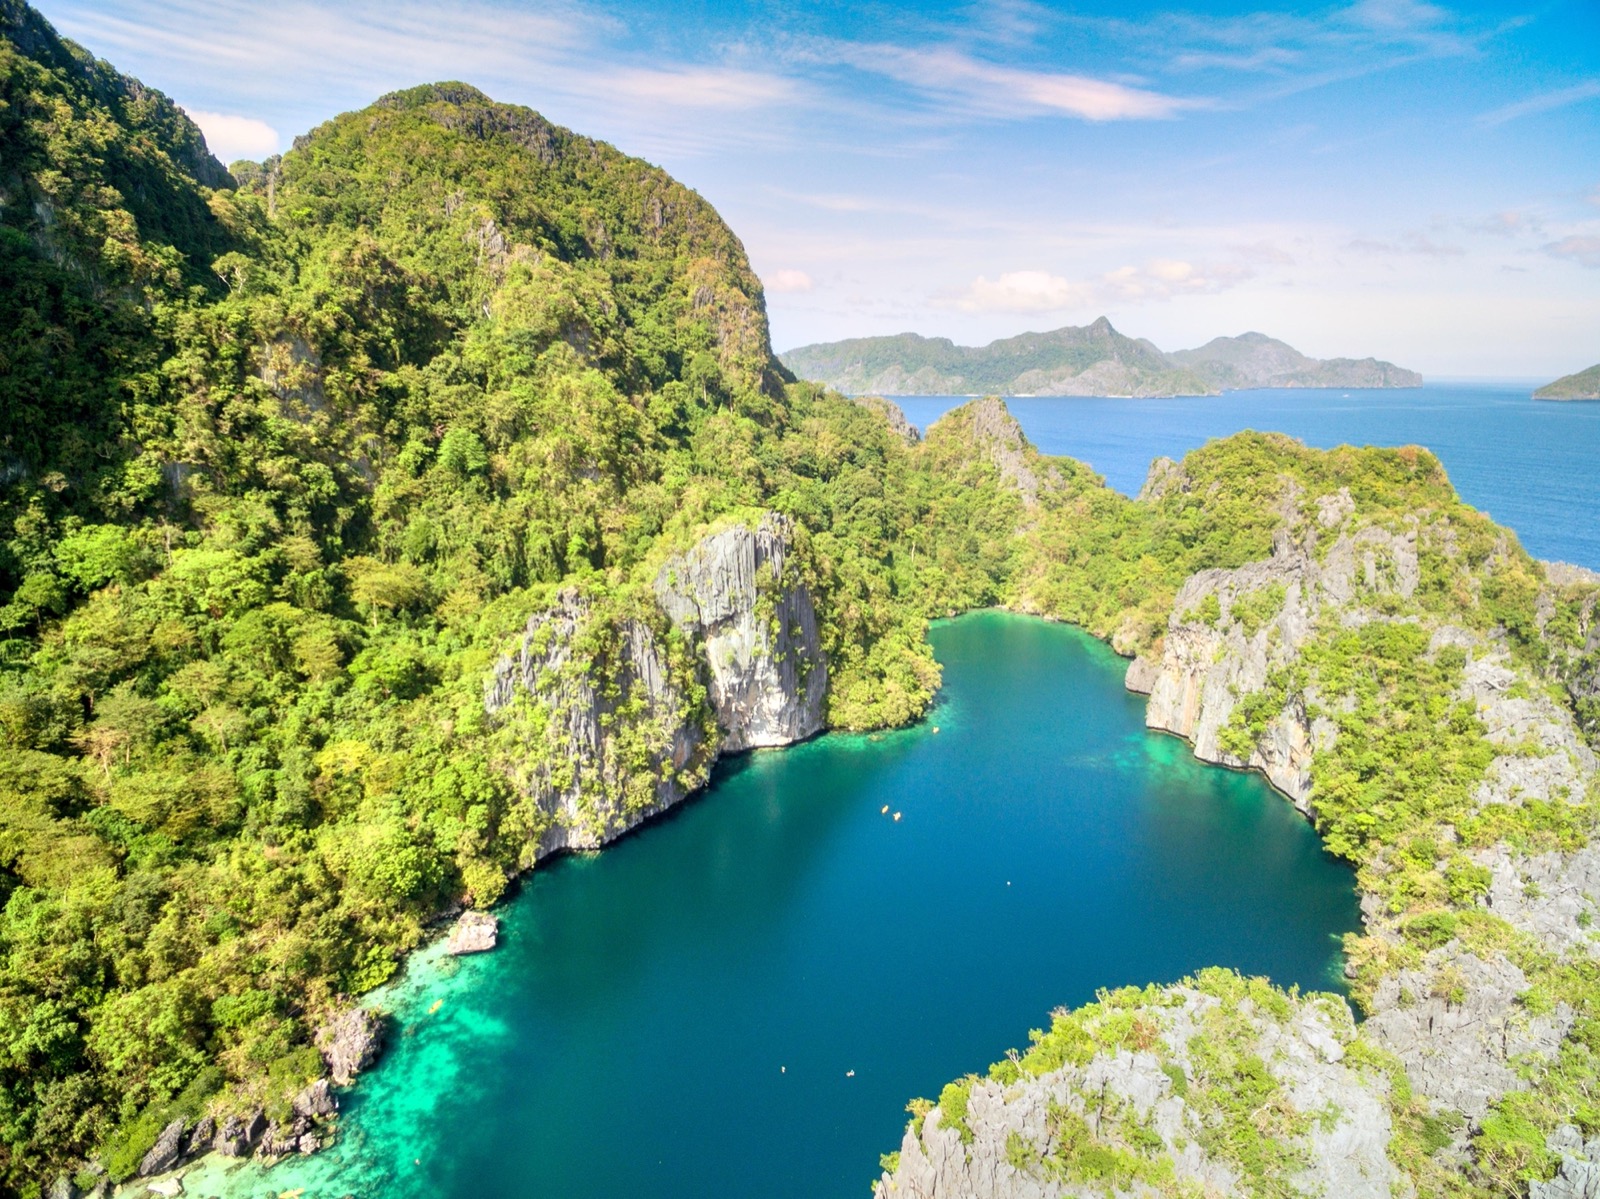 Do You Have Smarts to Pass This World Geography Quiz With Flying Colors ? Palawan Island, Philippines